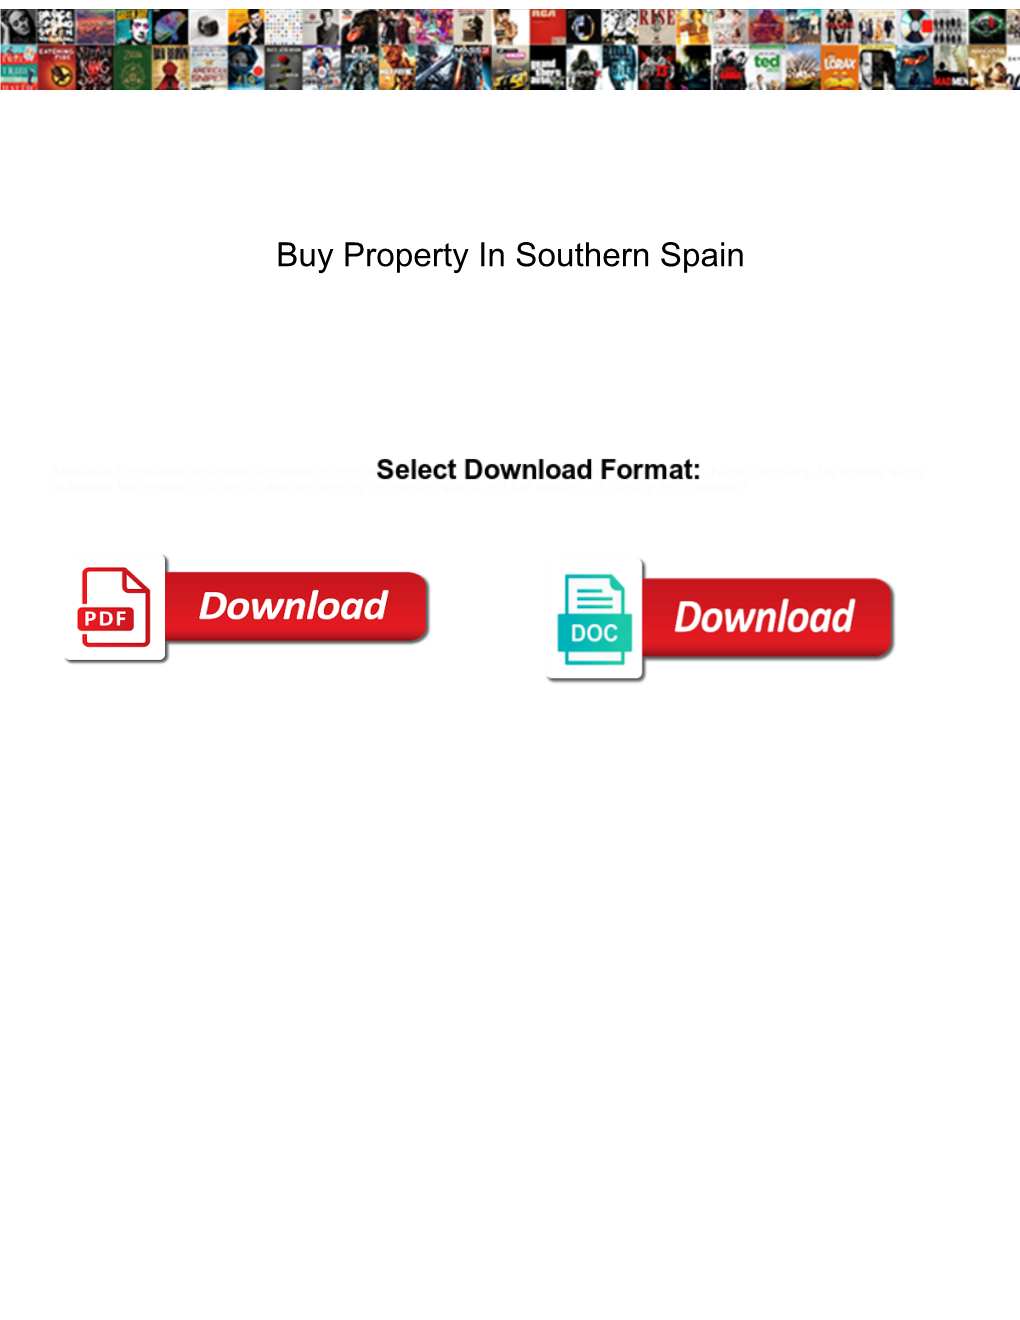 Buy Property in Southern Spain